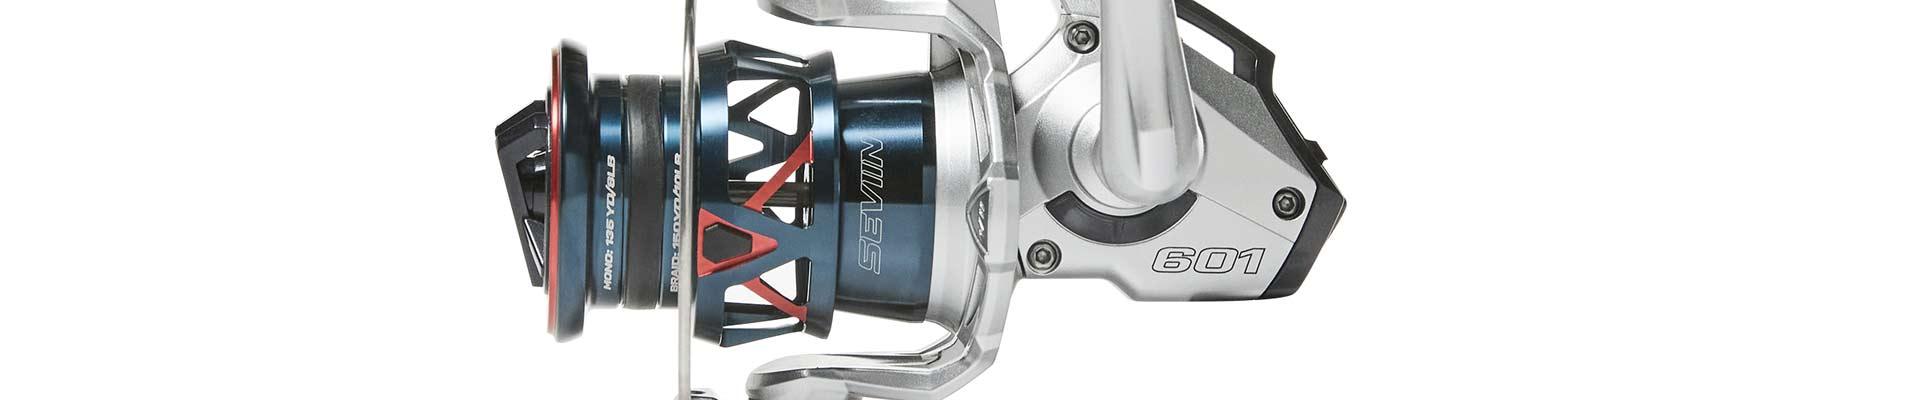 Spinning reel buyers guide